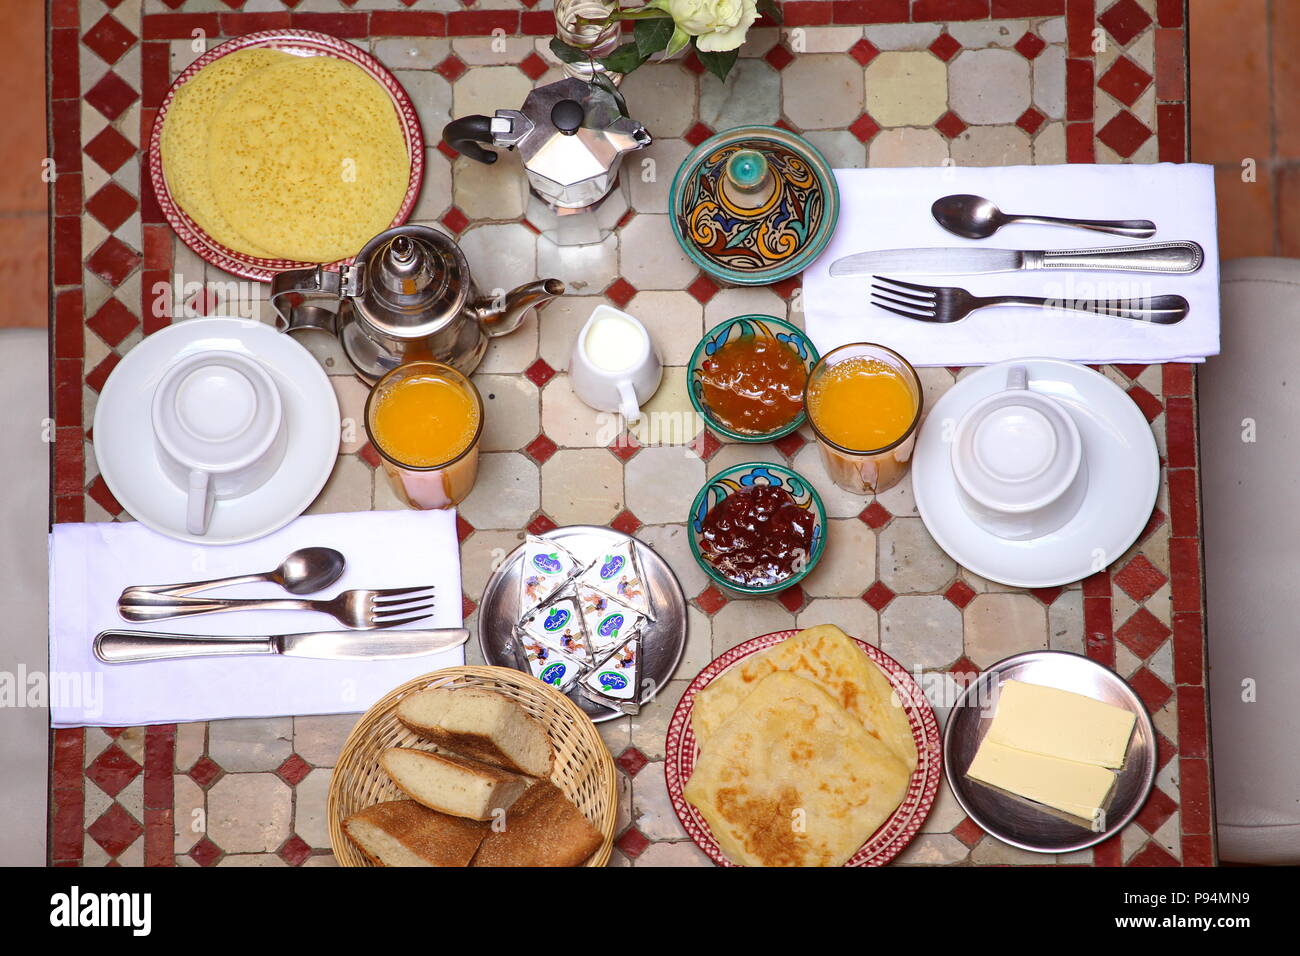 Delicious breakfast in Moroccan style served in riad (traditional Moroccan hotel) Stock Photo